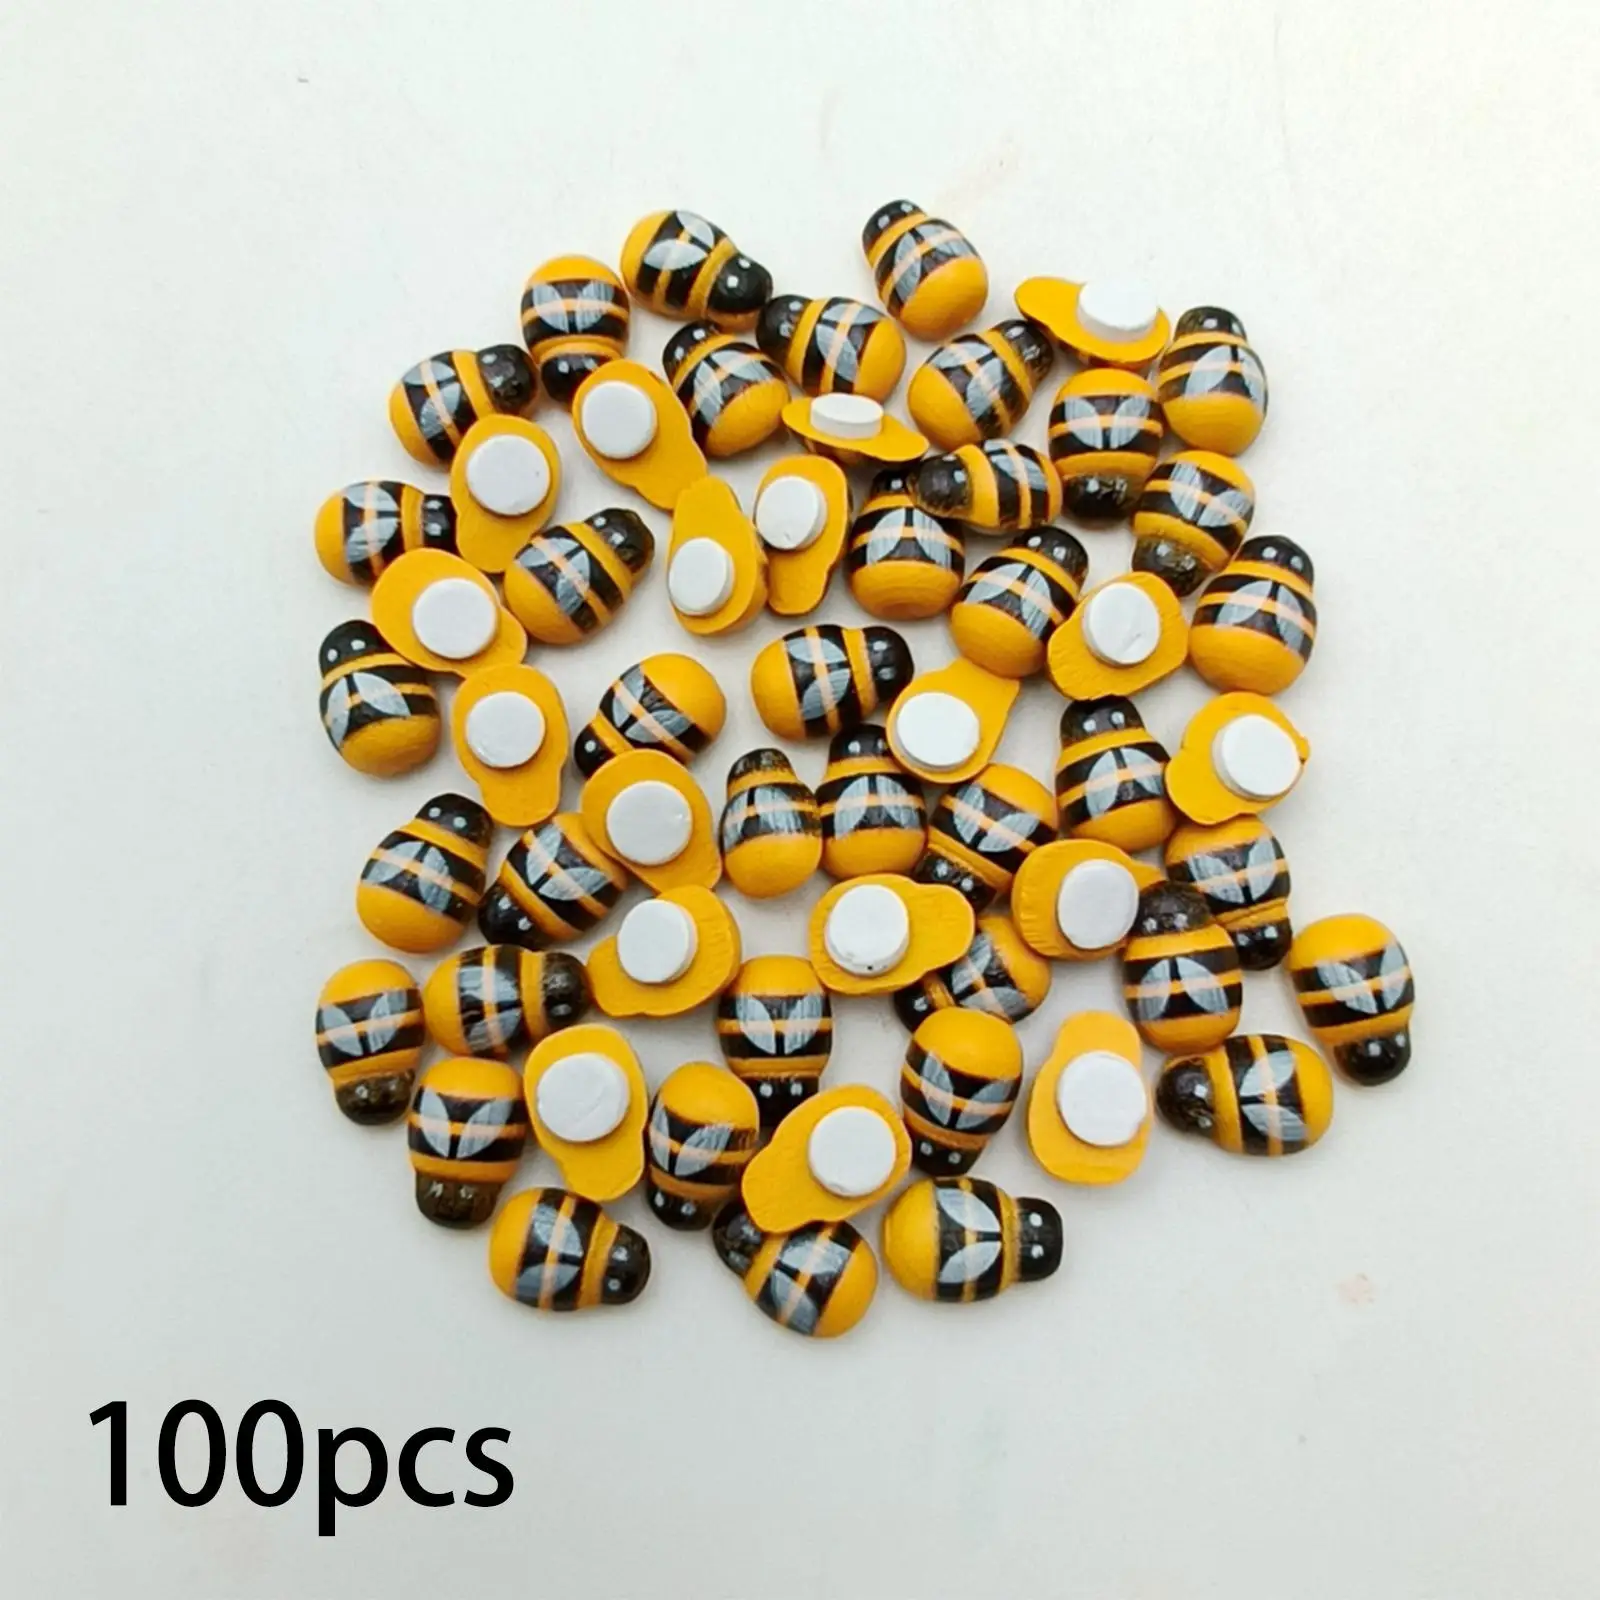 100x Flatback Embellishment Handicrafts Brooch Bees Stickers for Crafts for Shoes Invitations Hair Bow Center Craft Hats Dress